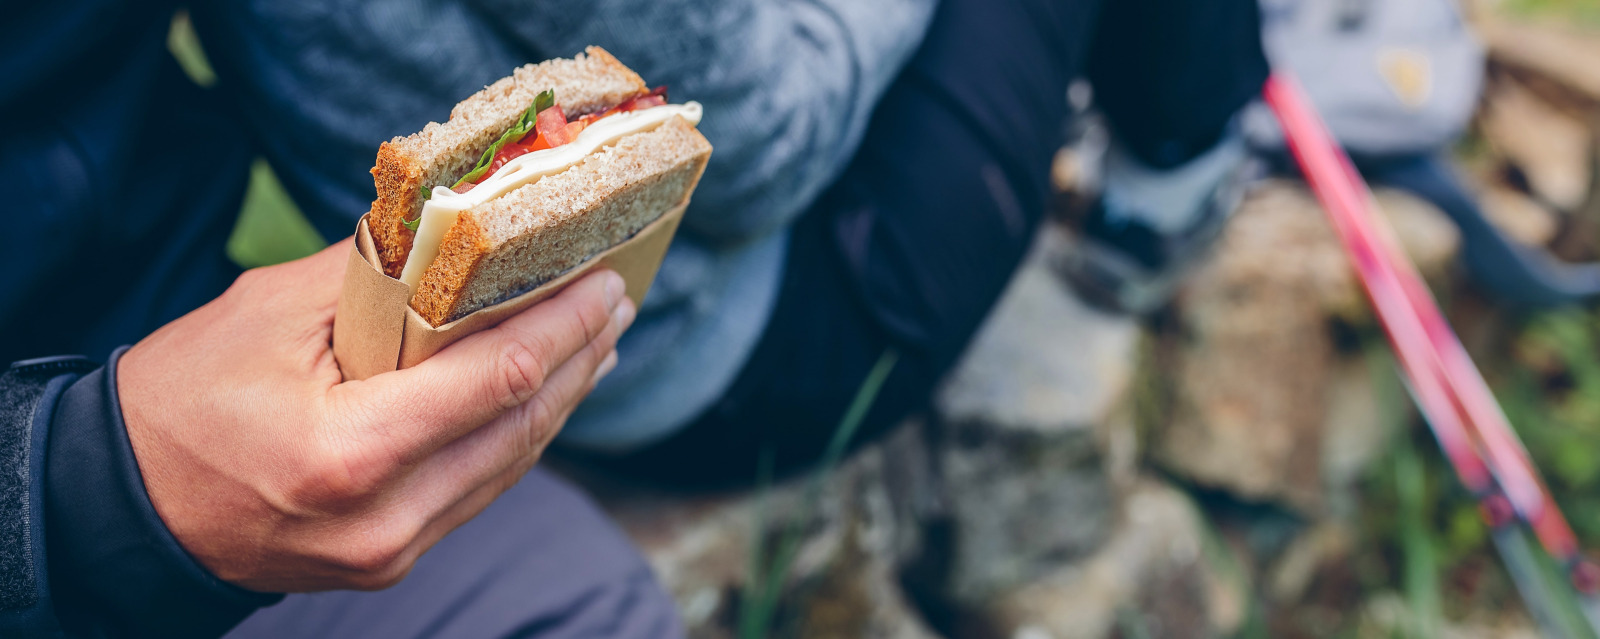 camping person eating sandwich